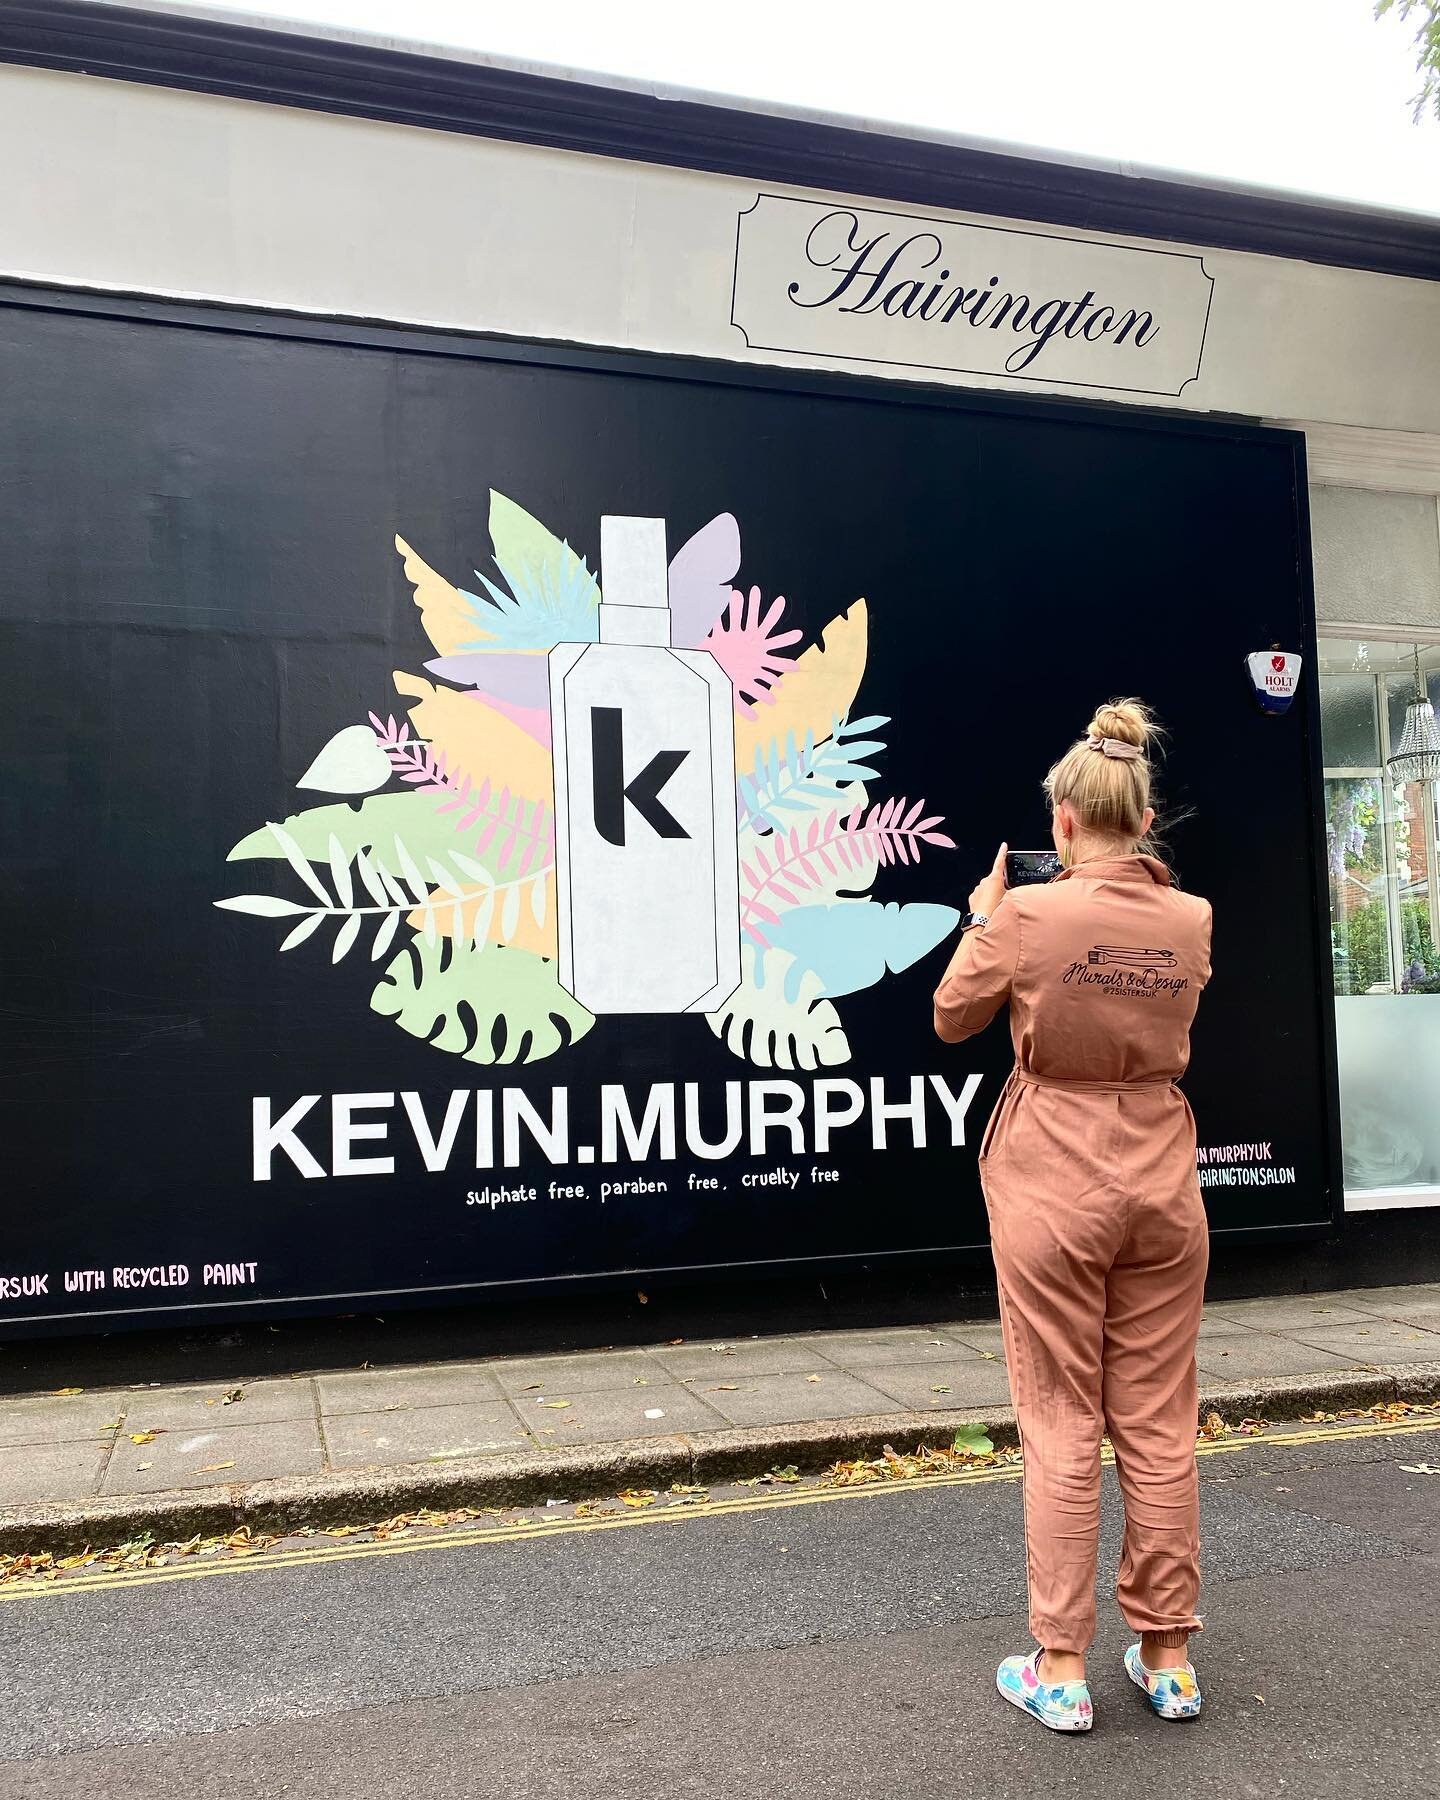 We&rsquo;ve wanted to get our hands on this wall for years! Thanks so much @thehairingtonsalon and @kevinmurphyuk for having us, we can&rsquo;t wait to go back to take more selfies 💋 Find it on the corner of Merton Road, at the end of Palmerston Roa